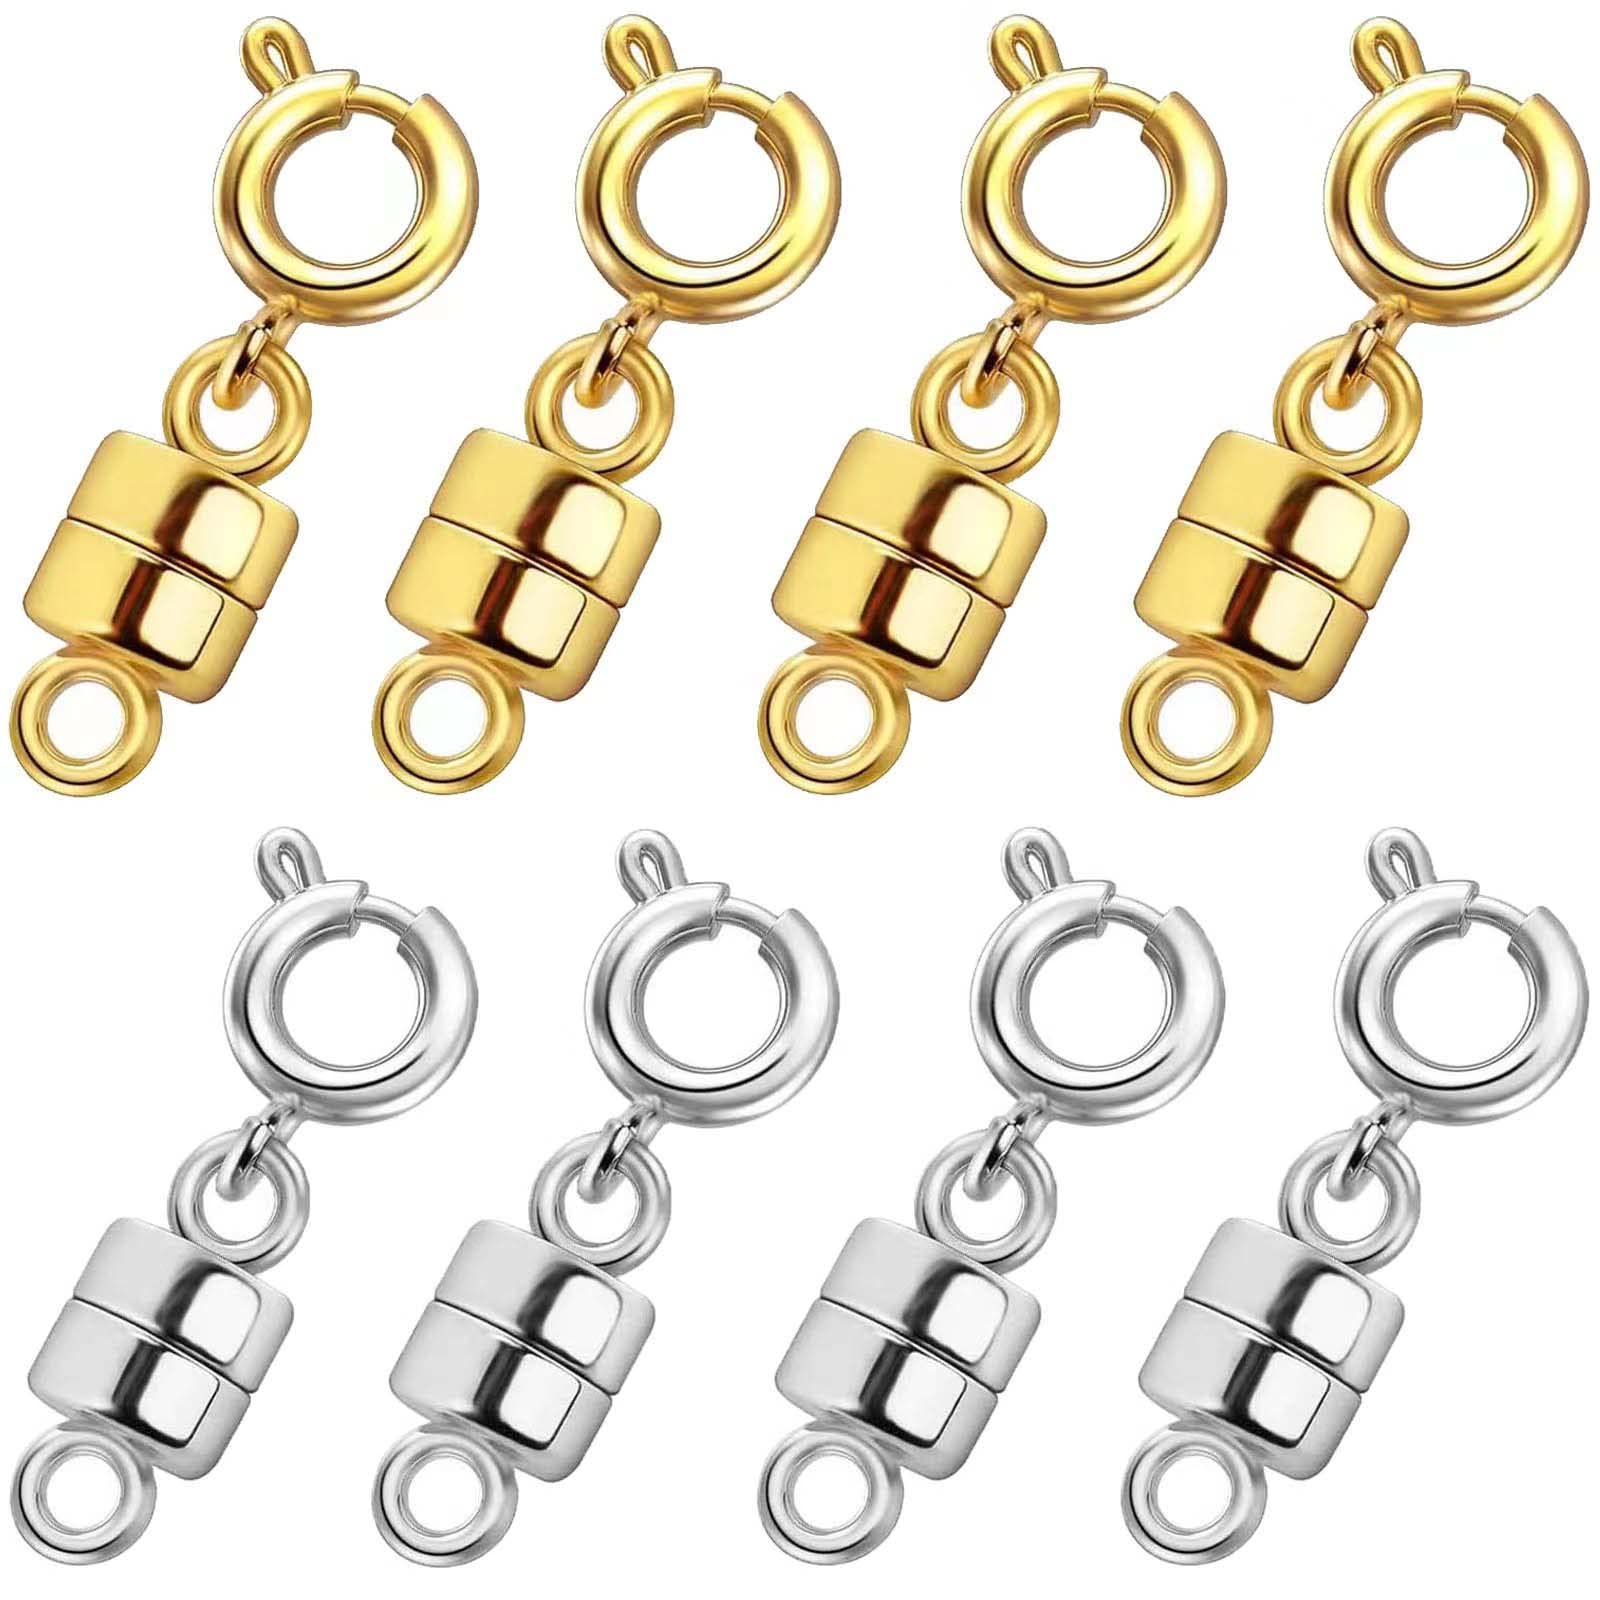 Qulltk Necklace Clasps and Closures 18K Gold and Silver Plated Bracelet  Converter Clasp,Suitable for Necklaces